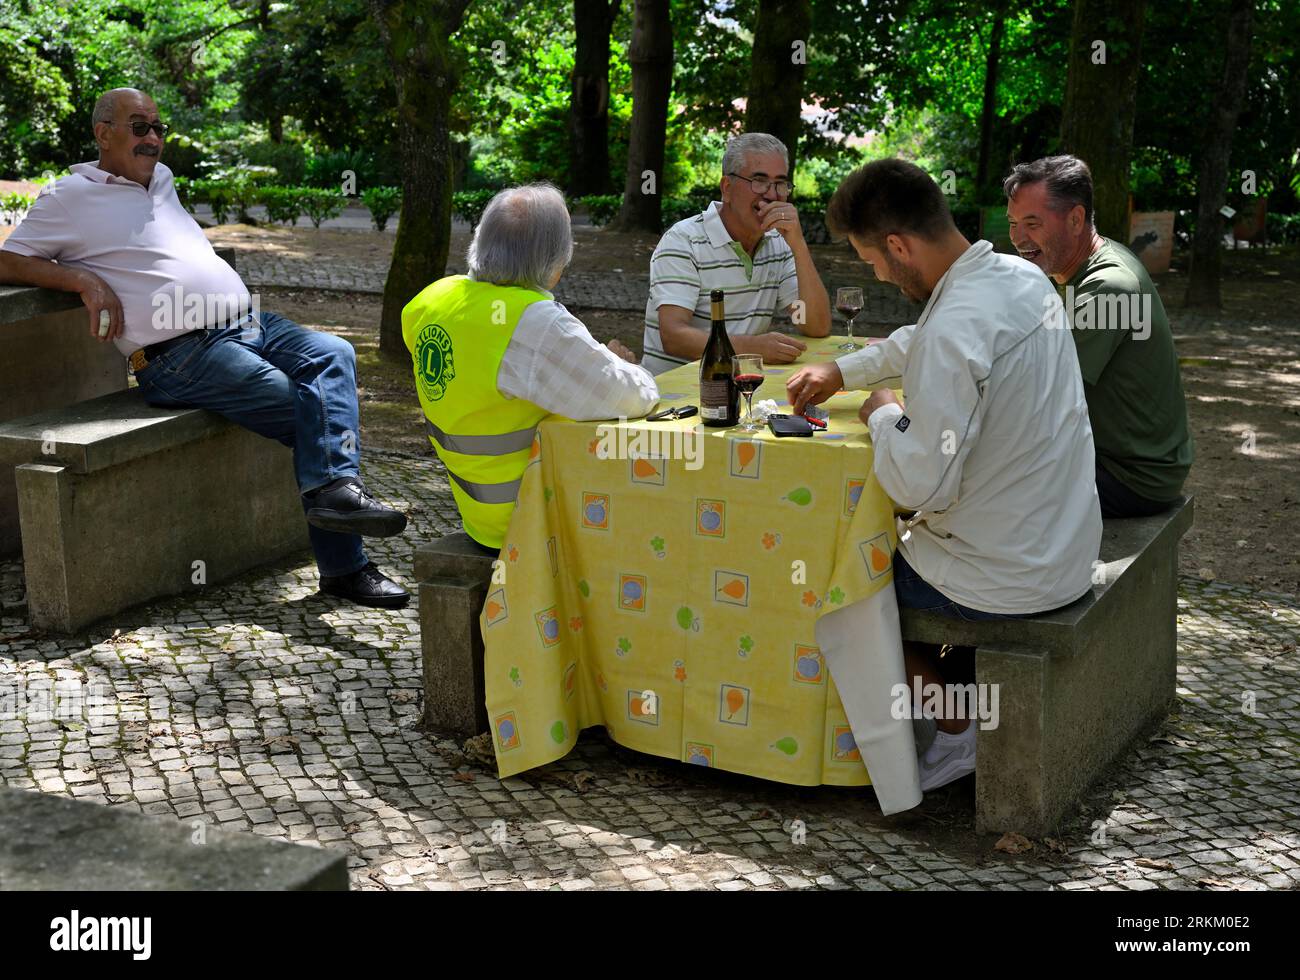 Friends meeting up outside for social chat and game of cards in local park, CentroDial, São João da Madeira, Portugal Stock Photo